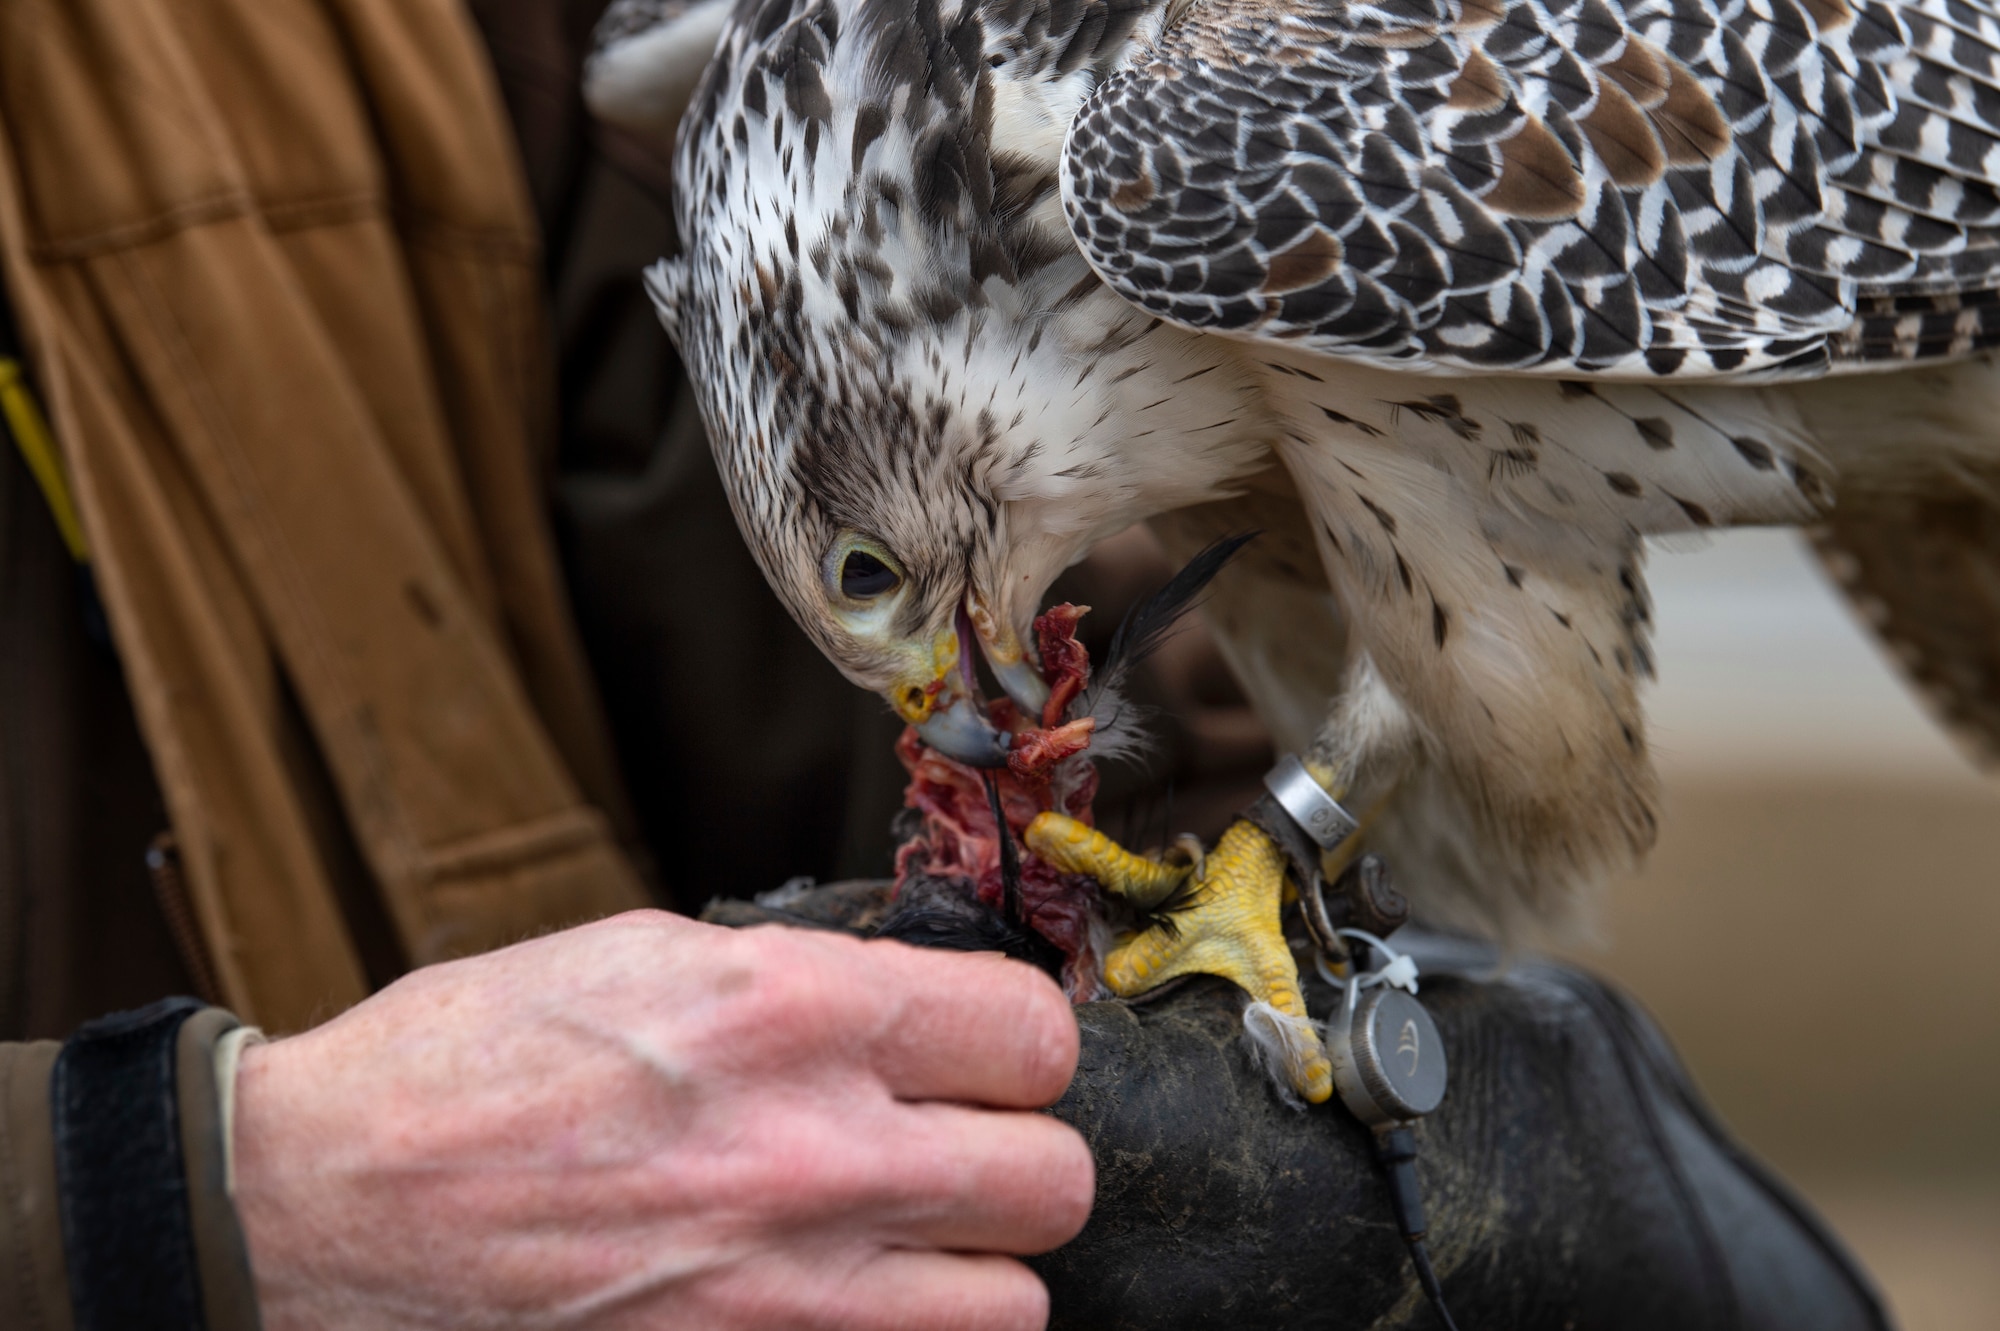 Jens Fleer, 52nd Fighter Wing base falconer, lets his female hawk feed on a crow at Spangdahlem Air Base, Germany, Jan. 16, 2019. Wildlife can cause foreign object damage to aircraft. Fleer uses hawks to keep the sky and flightline clear of pests. (U.S. Air Force photo by Airman 1st Class Valerie Seelye)